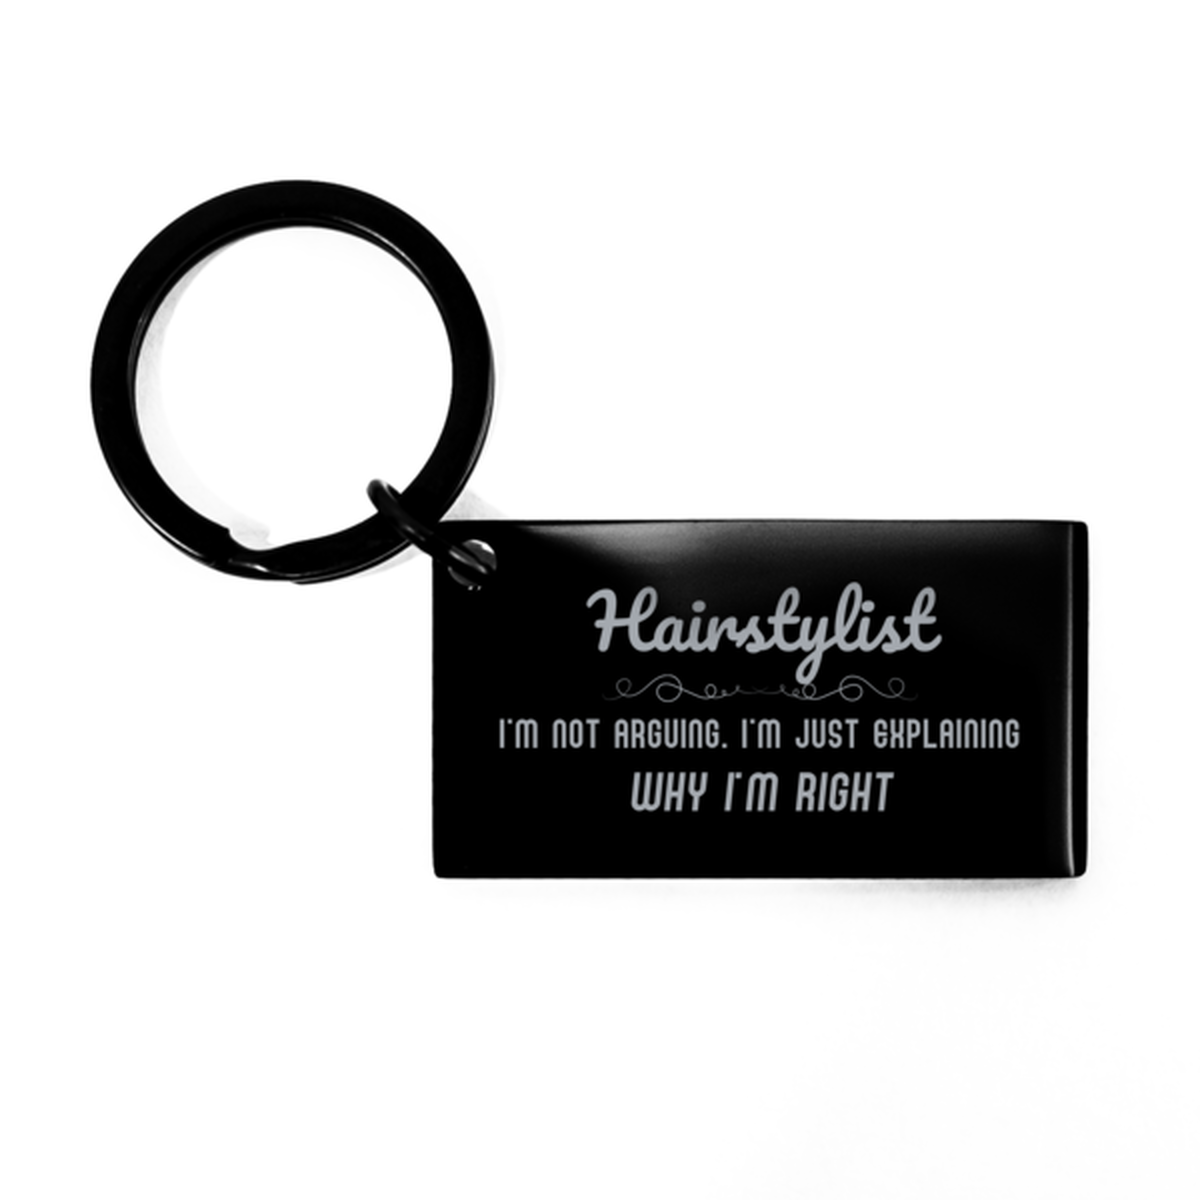 Hairstylist I'm not Arguing. I'm Just Explaining Why I'm RIGHT Keychain, Funny Saying Quote Hairstylist Gifts For Hairstylist Graduation Birthday Christmas Gifts for Men Women Coworker